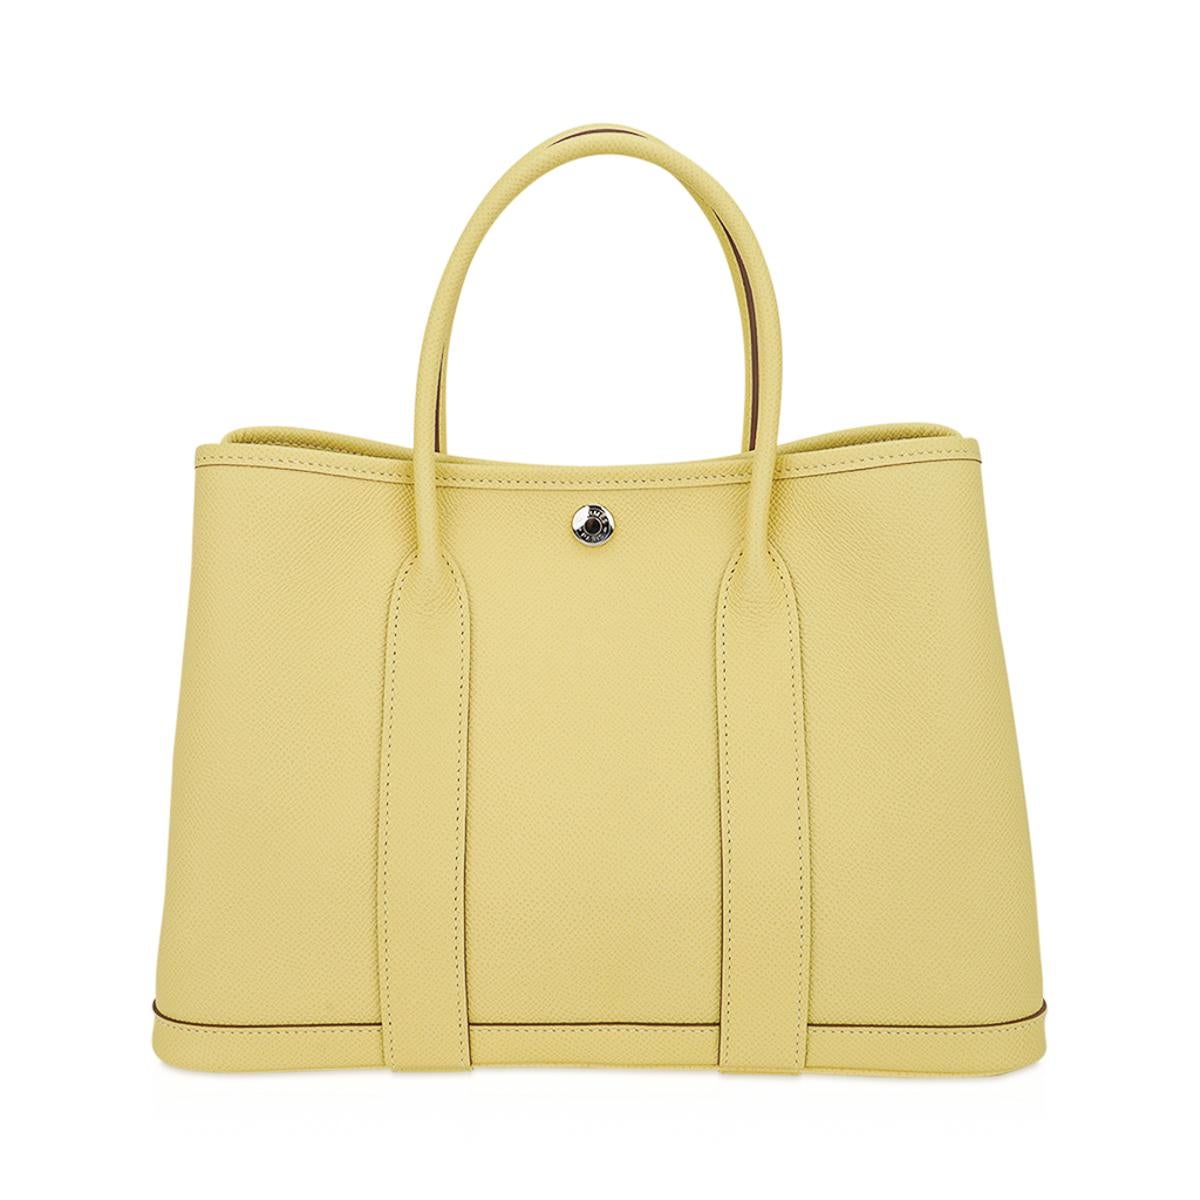 Hermes Garden Party 30 Bag Jaune Poussin Tote Epsom Leather Palladium In New Condition For Sale In Miami, FL